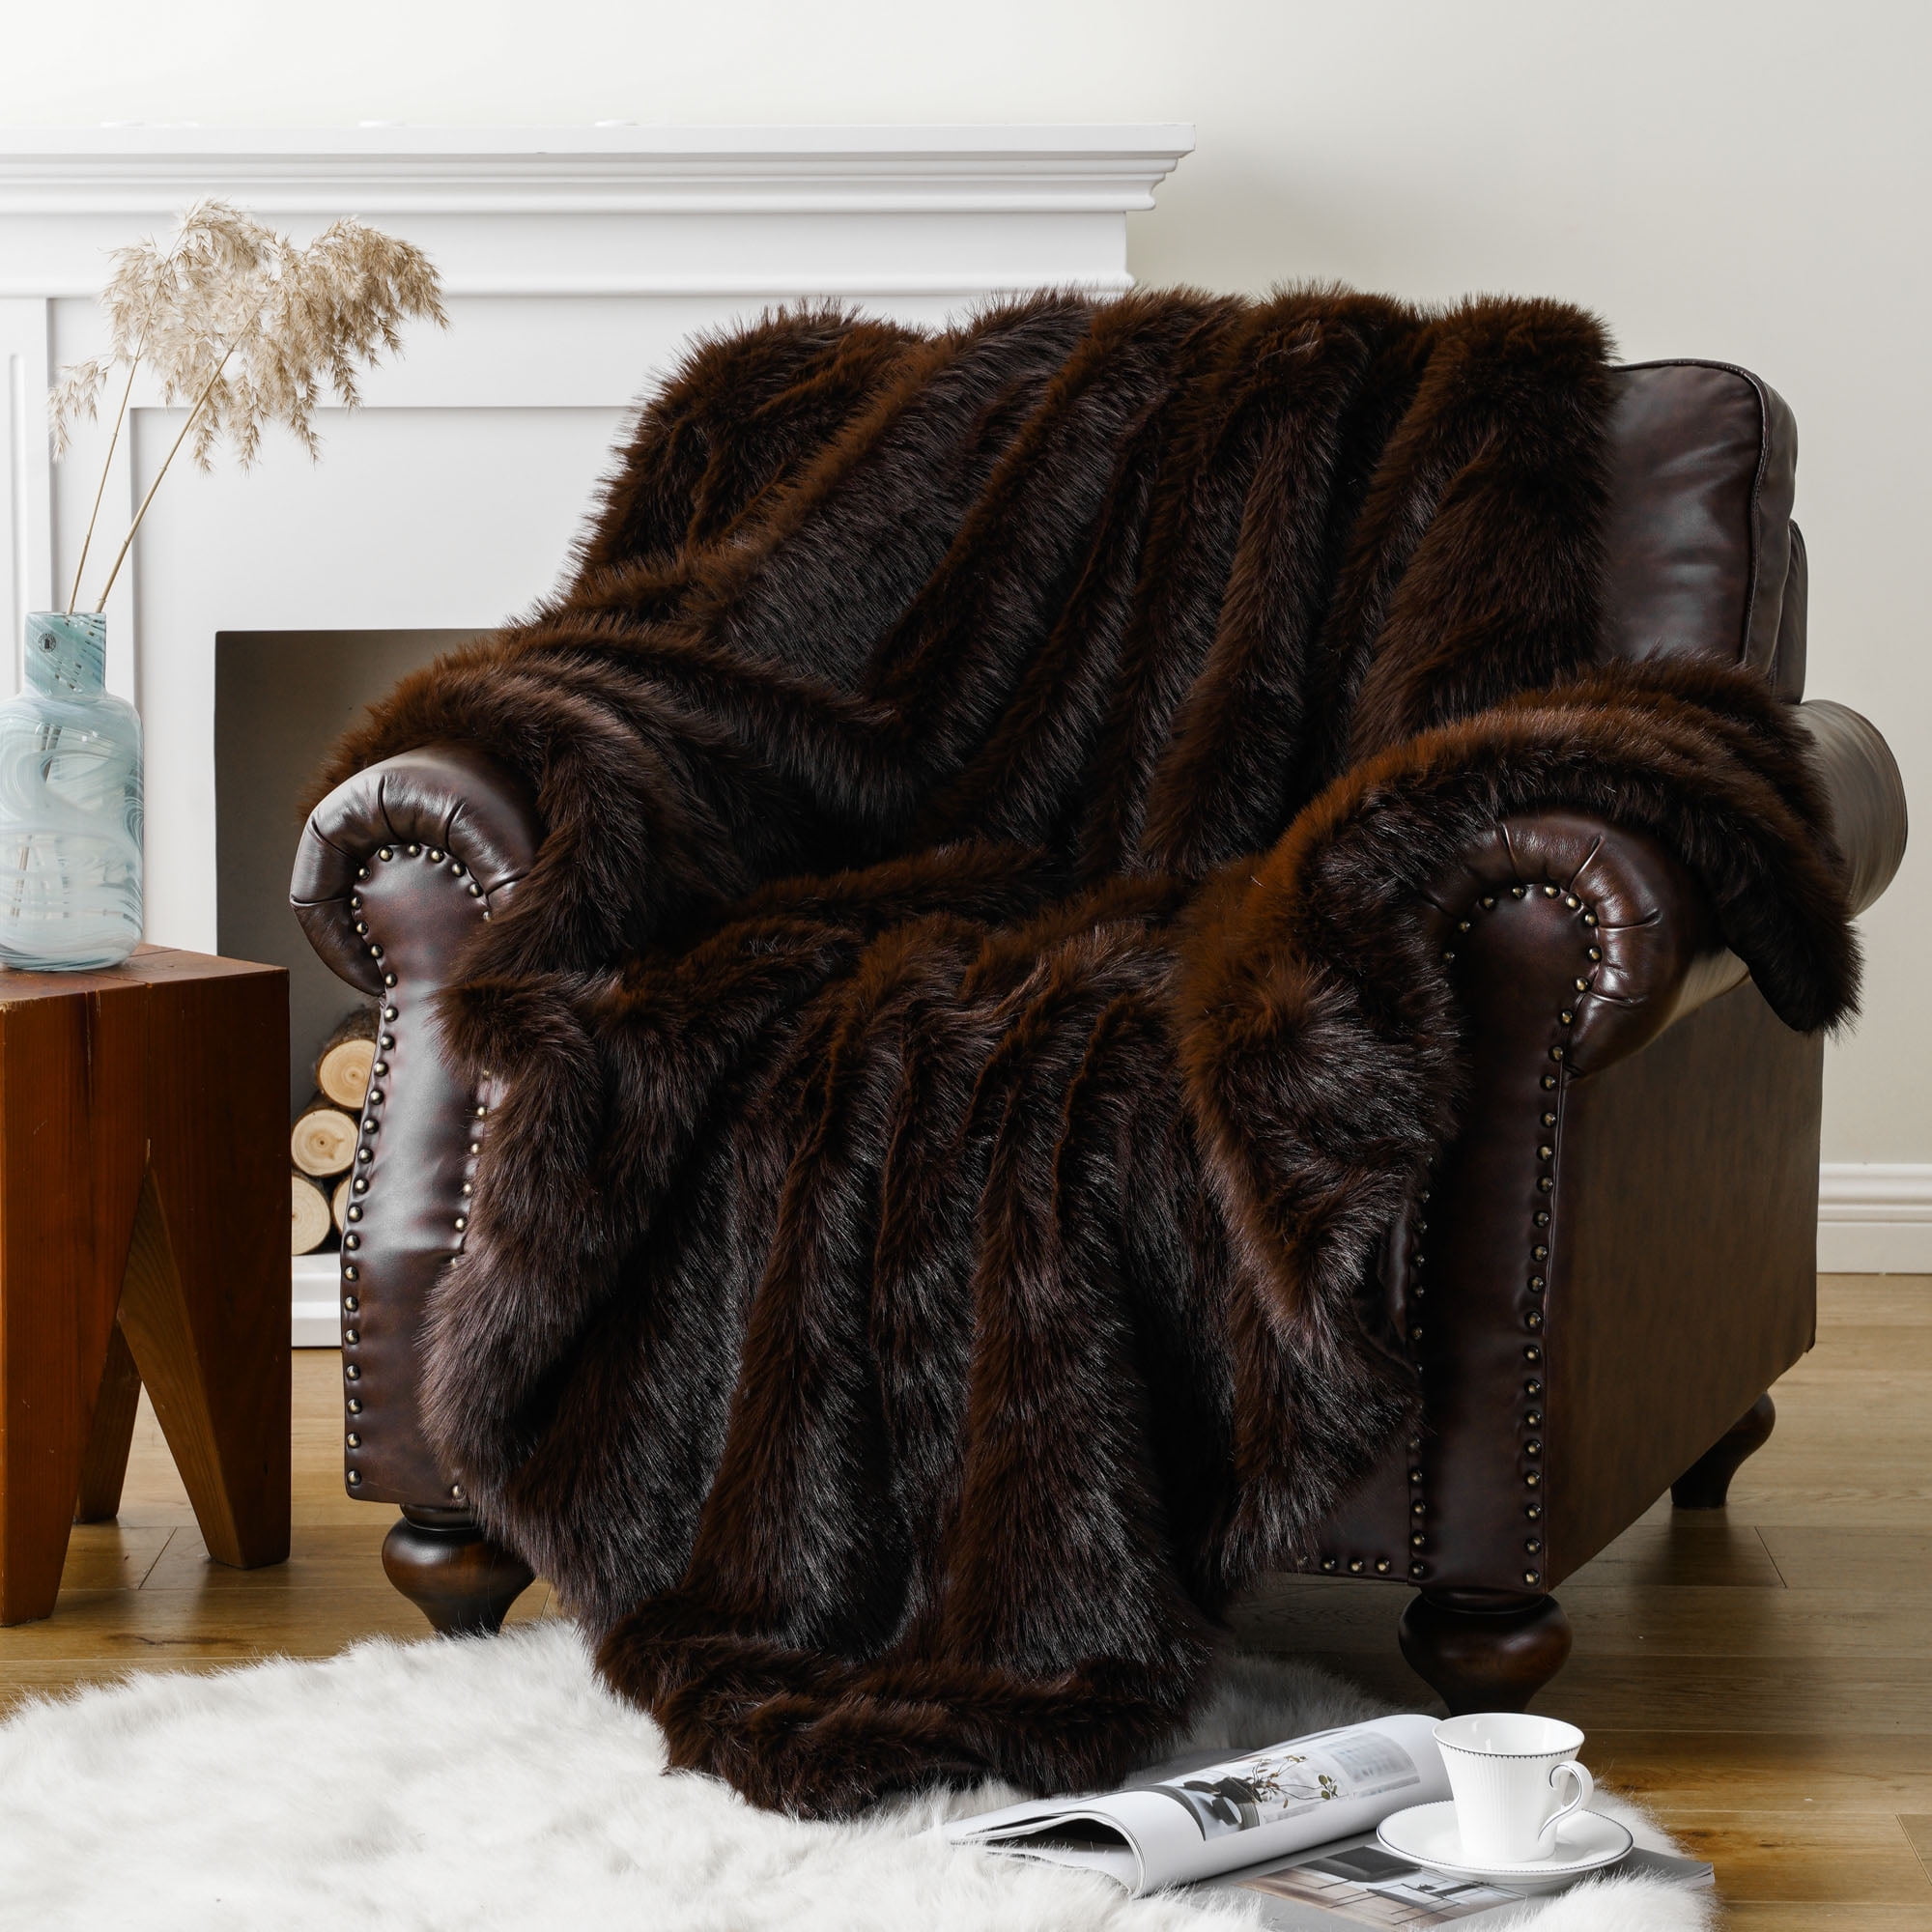 Battilo Luxury Fluffy Brown Faux Fur Throw Blanket, Cozy Thick Warm Fur Blanket for Couch, Sofa, Chair, Bed, Plush Fuzzy Fur Throws with Long Pile, 50